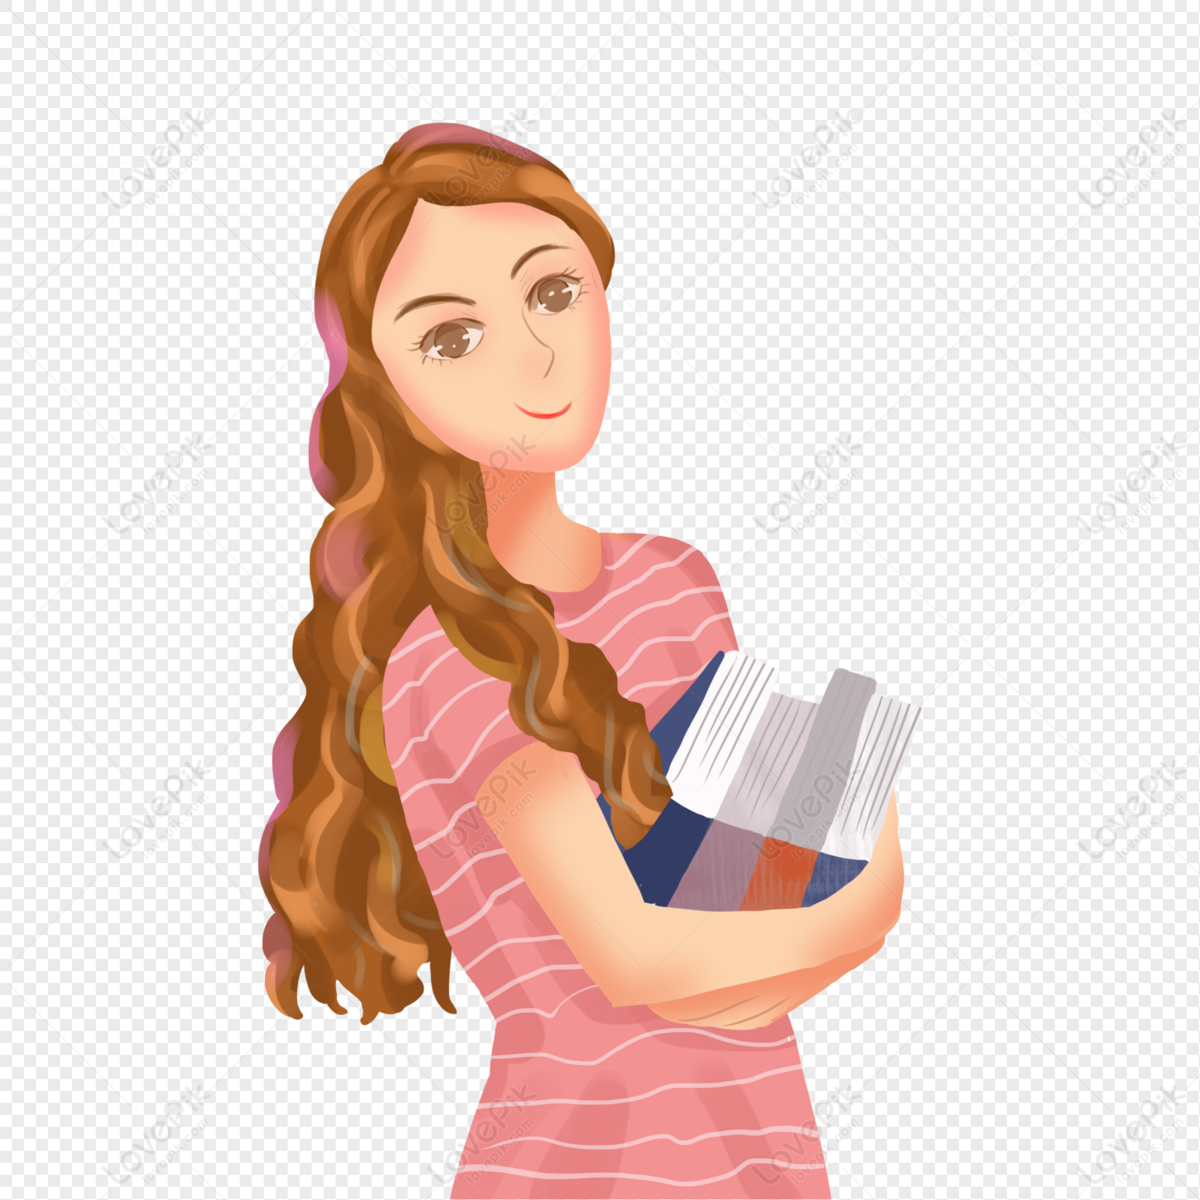 Hand drawn summer training girl holding book in library, book, holding book, summer training png free download